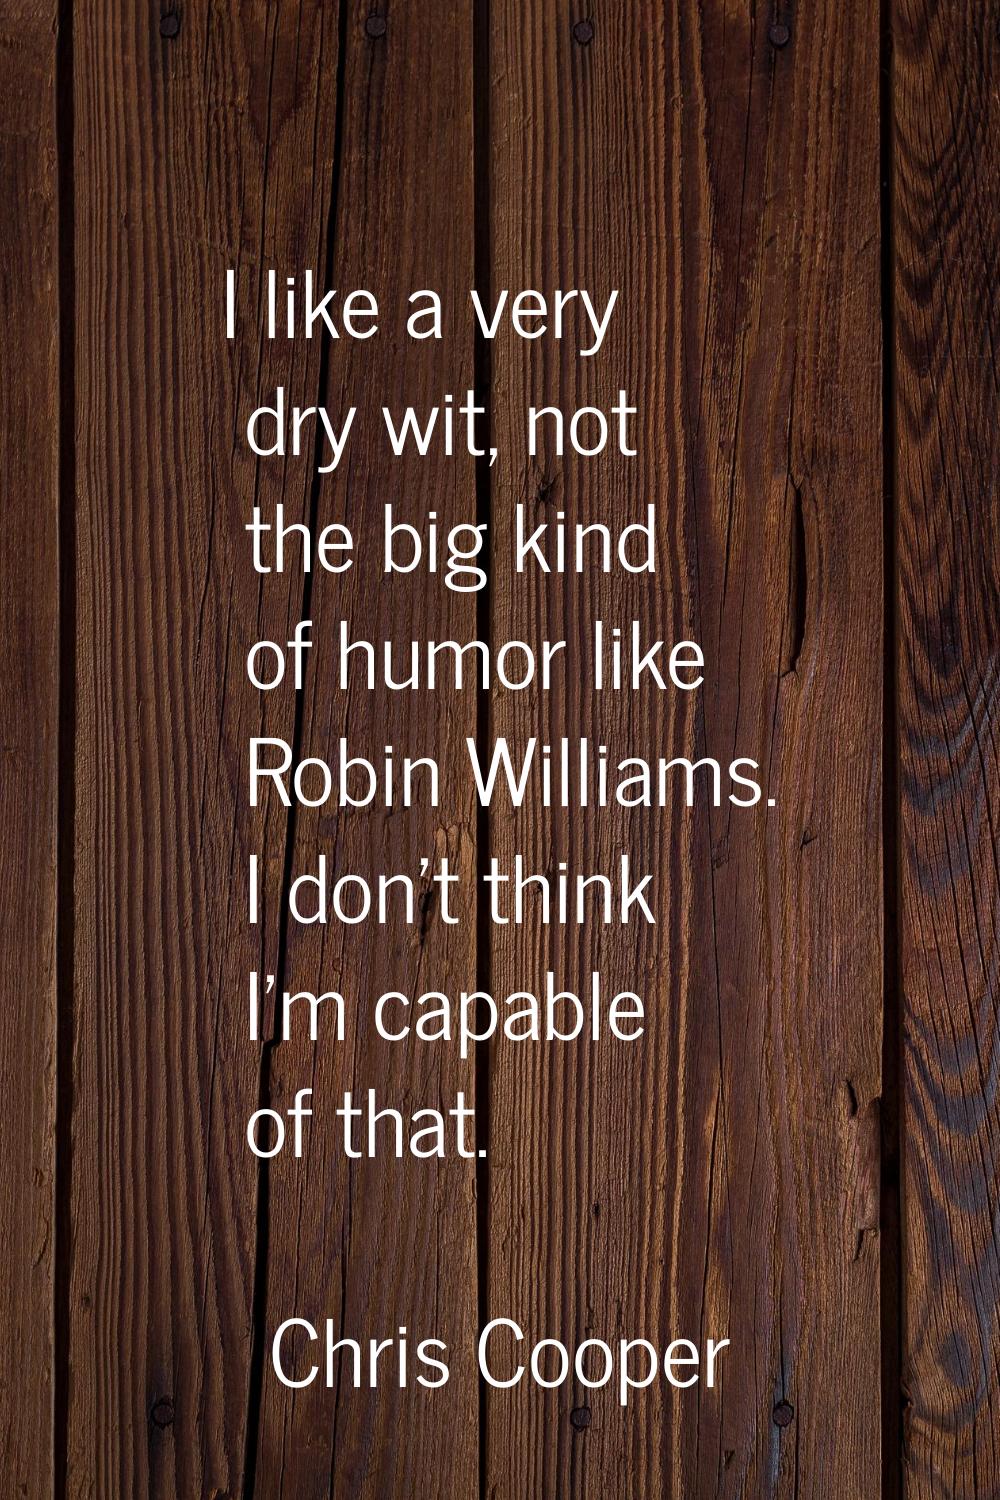 I like a very dry wit, not the big kind of humor like Robin Williams. I don't think I'm capable of 